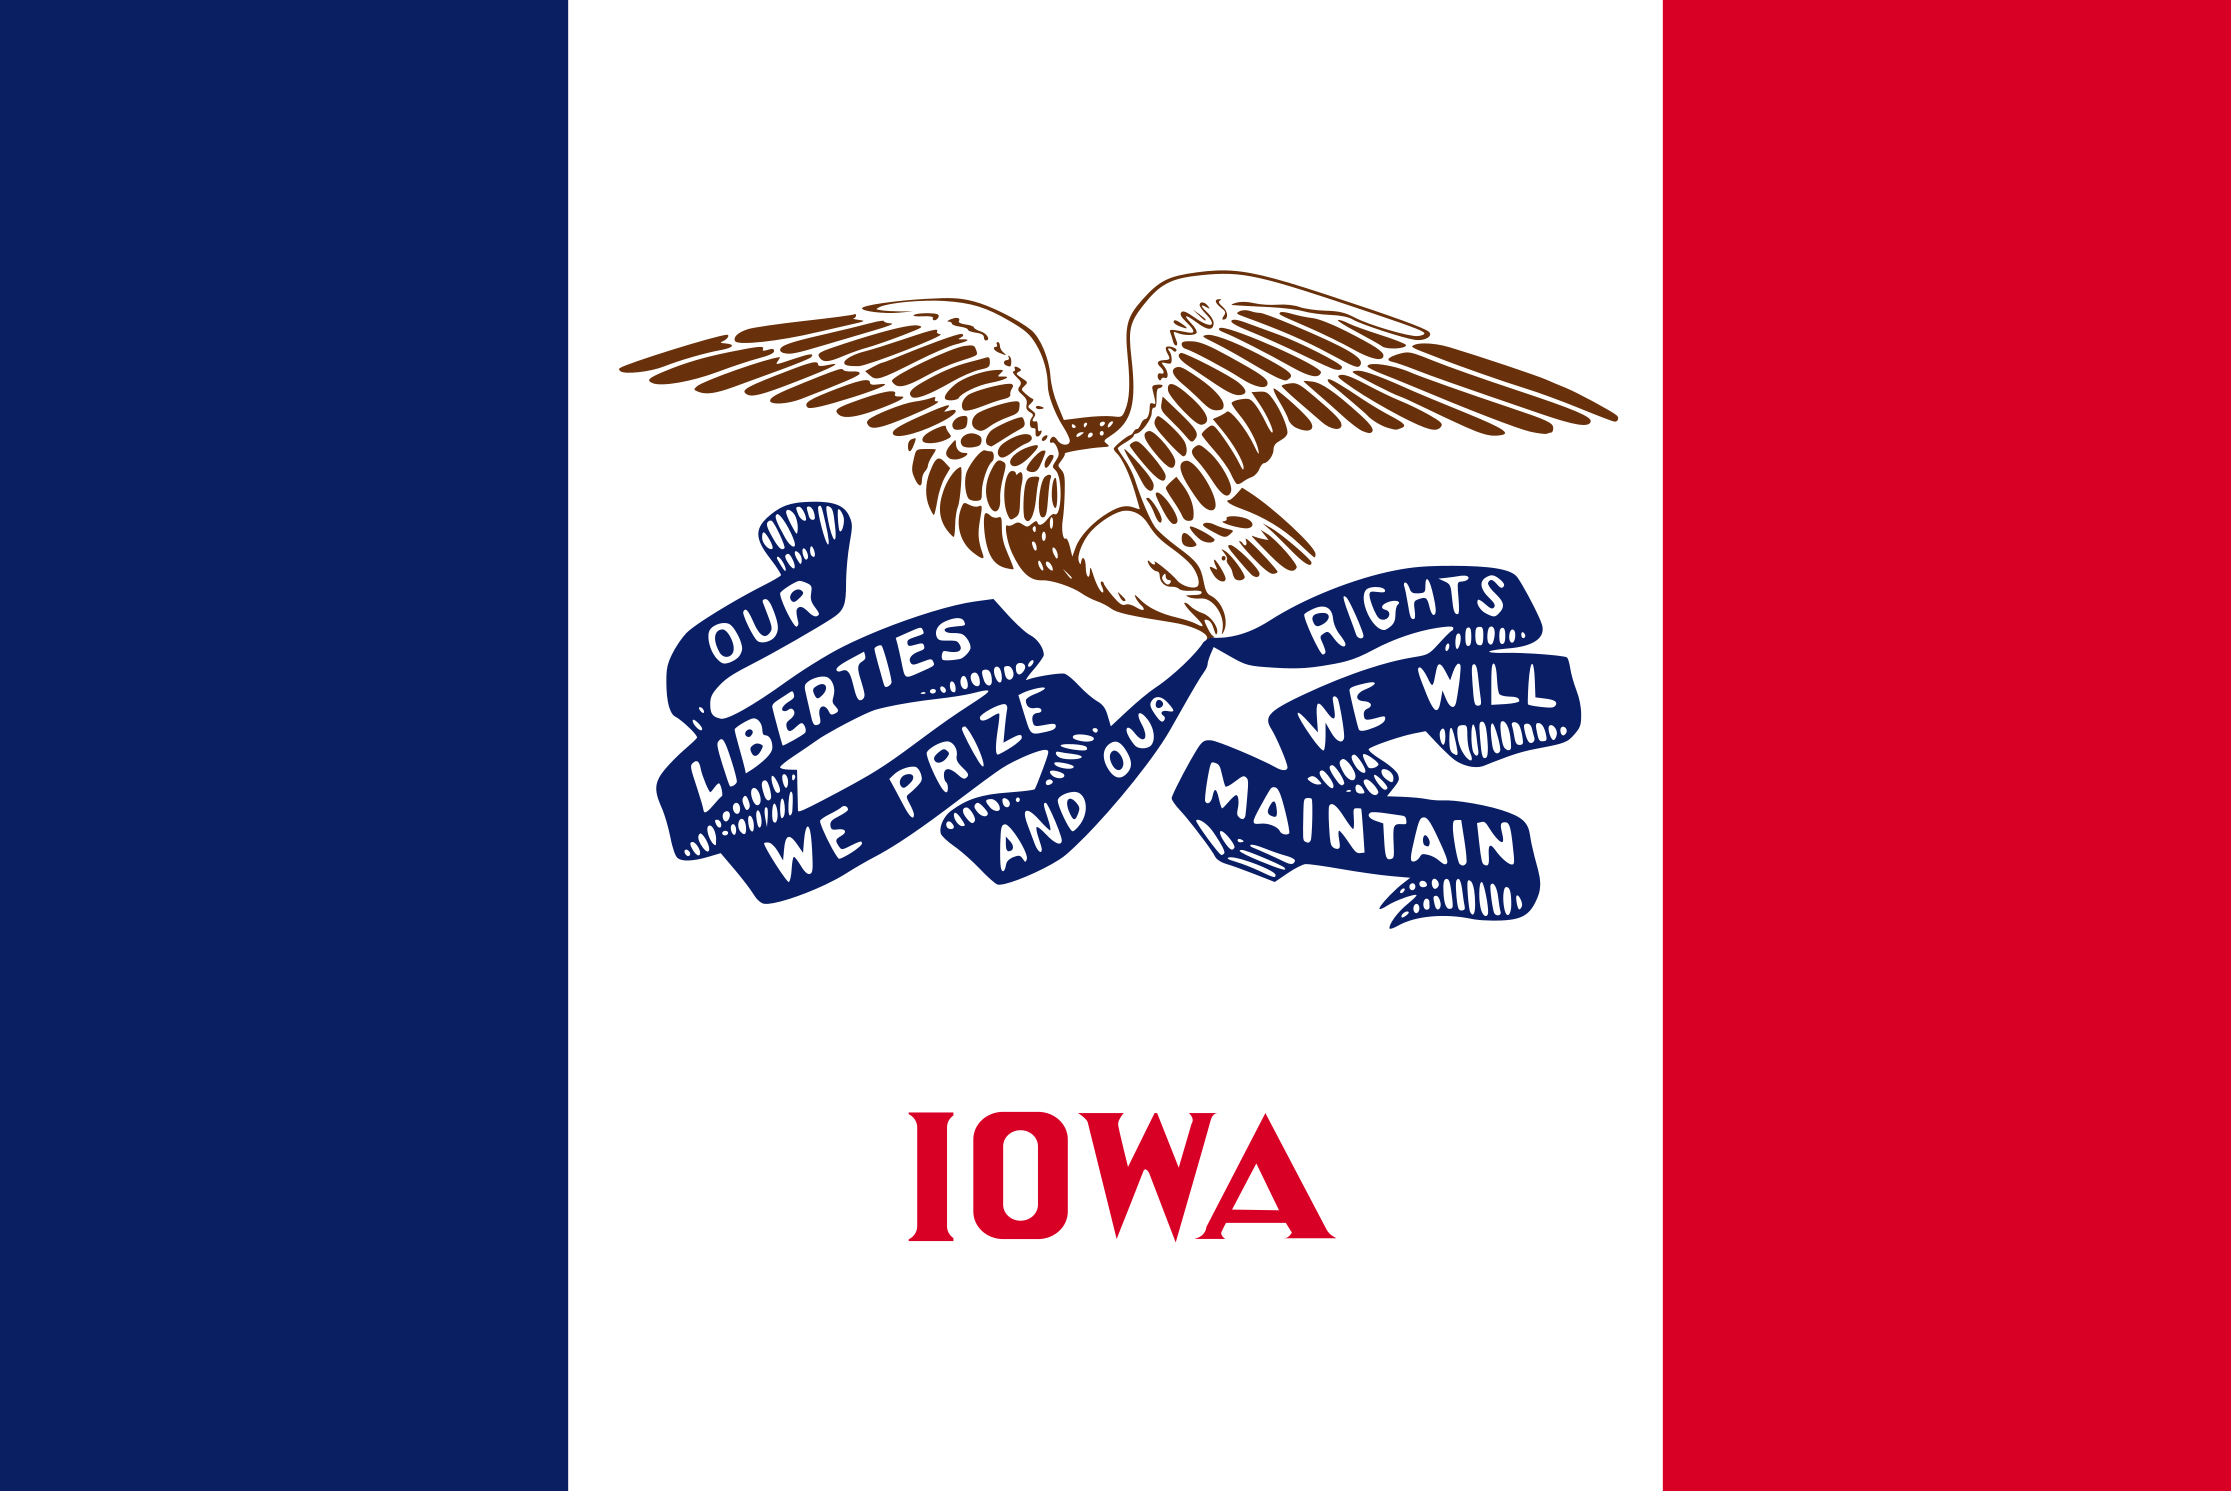 Free Iowa Flag Images: AI, EPS, GIF, JPG, PDF, PNG, SVG and more!